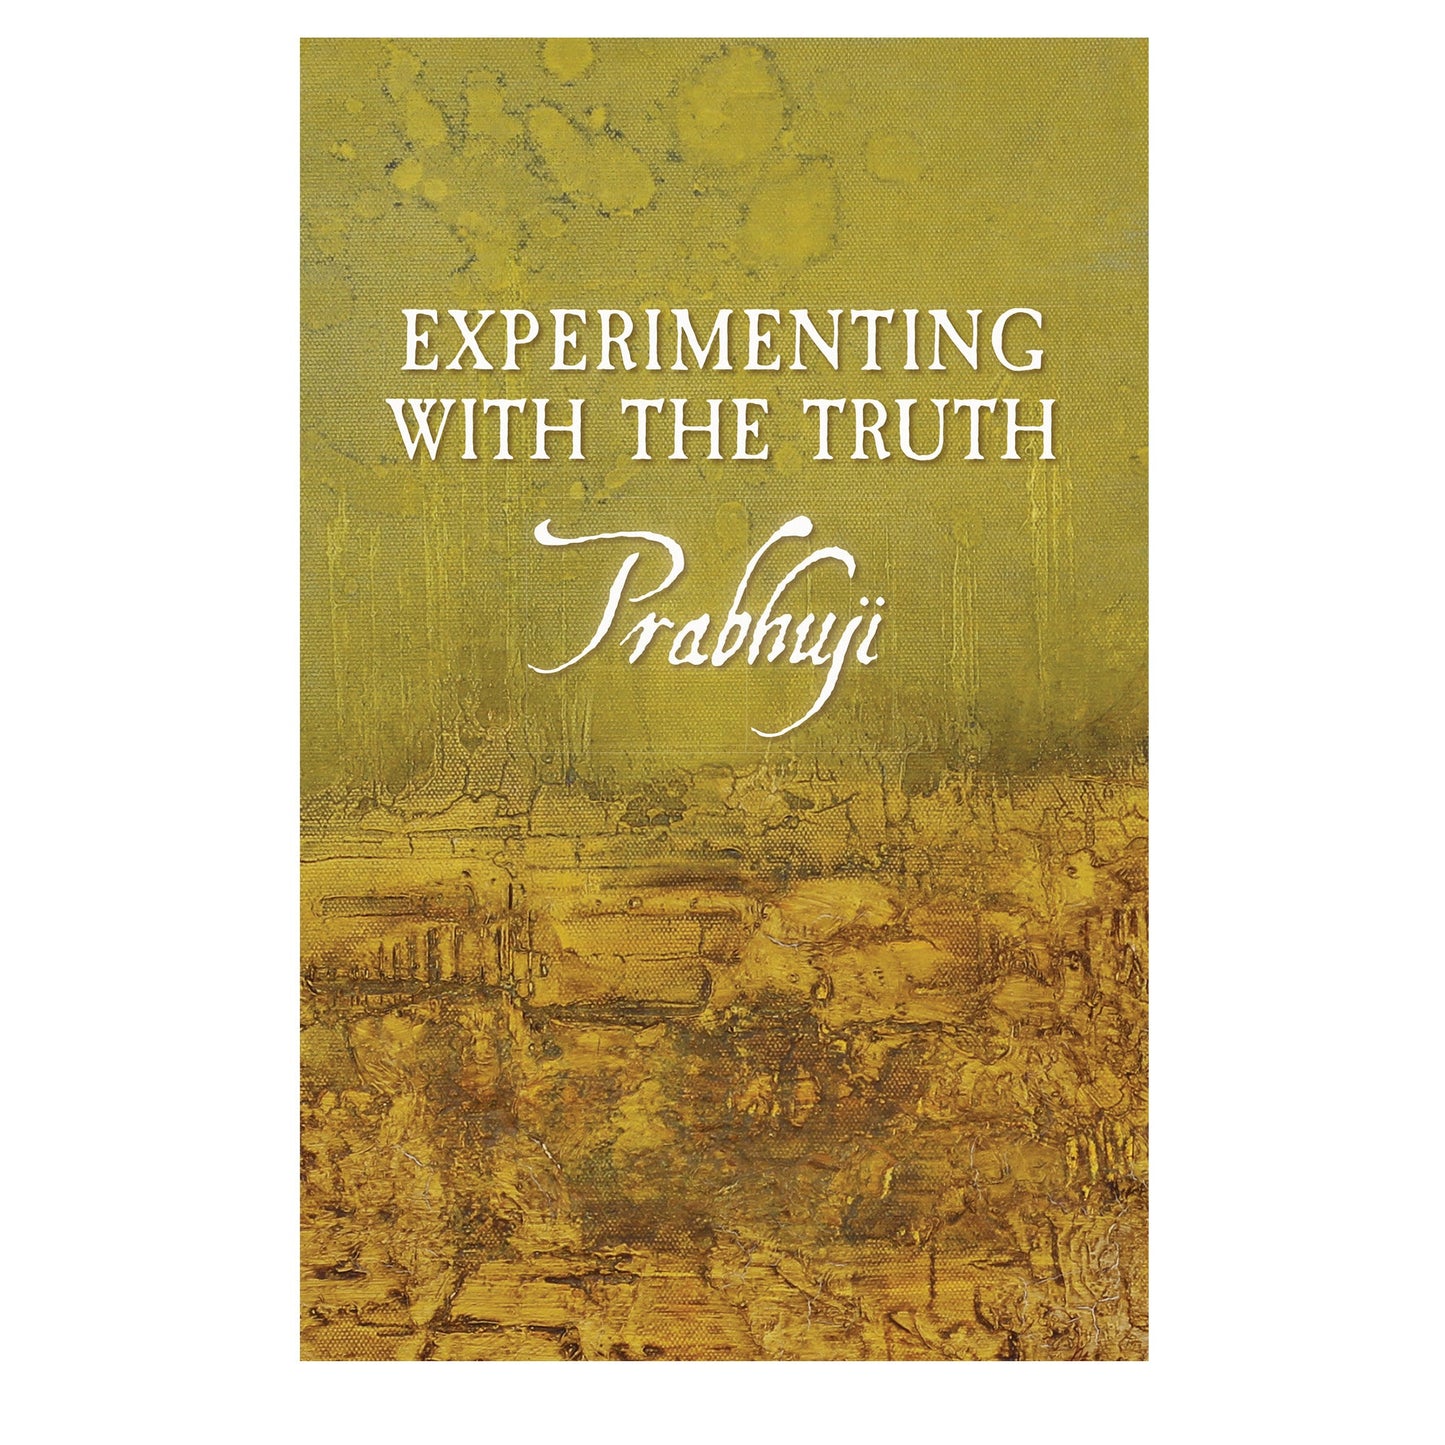 Book Experimenting with the Truth by Prabhuji (Hard cover - English)